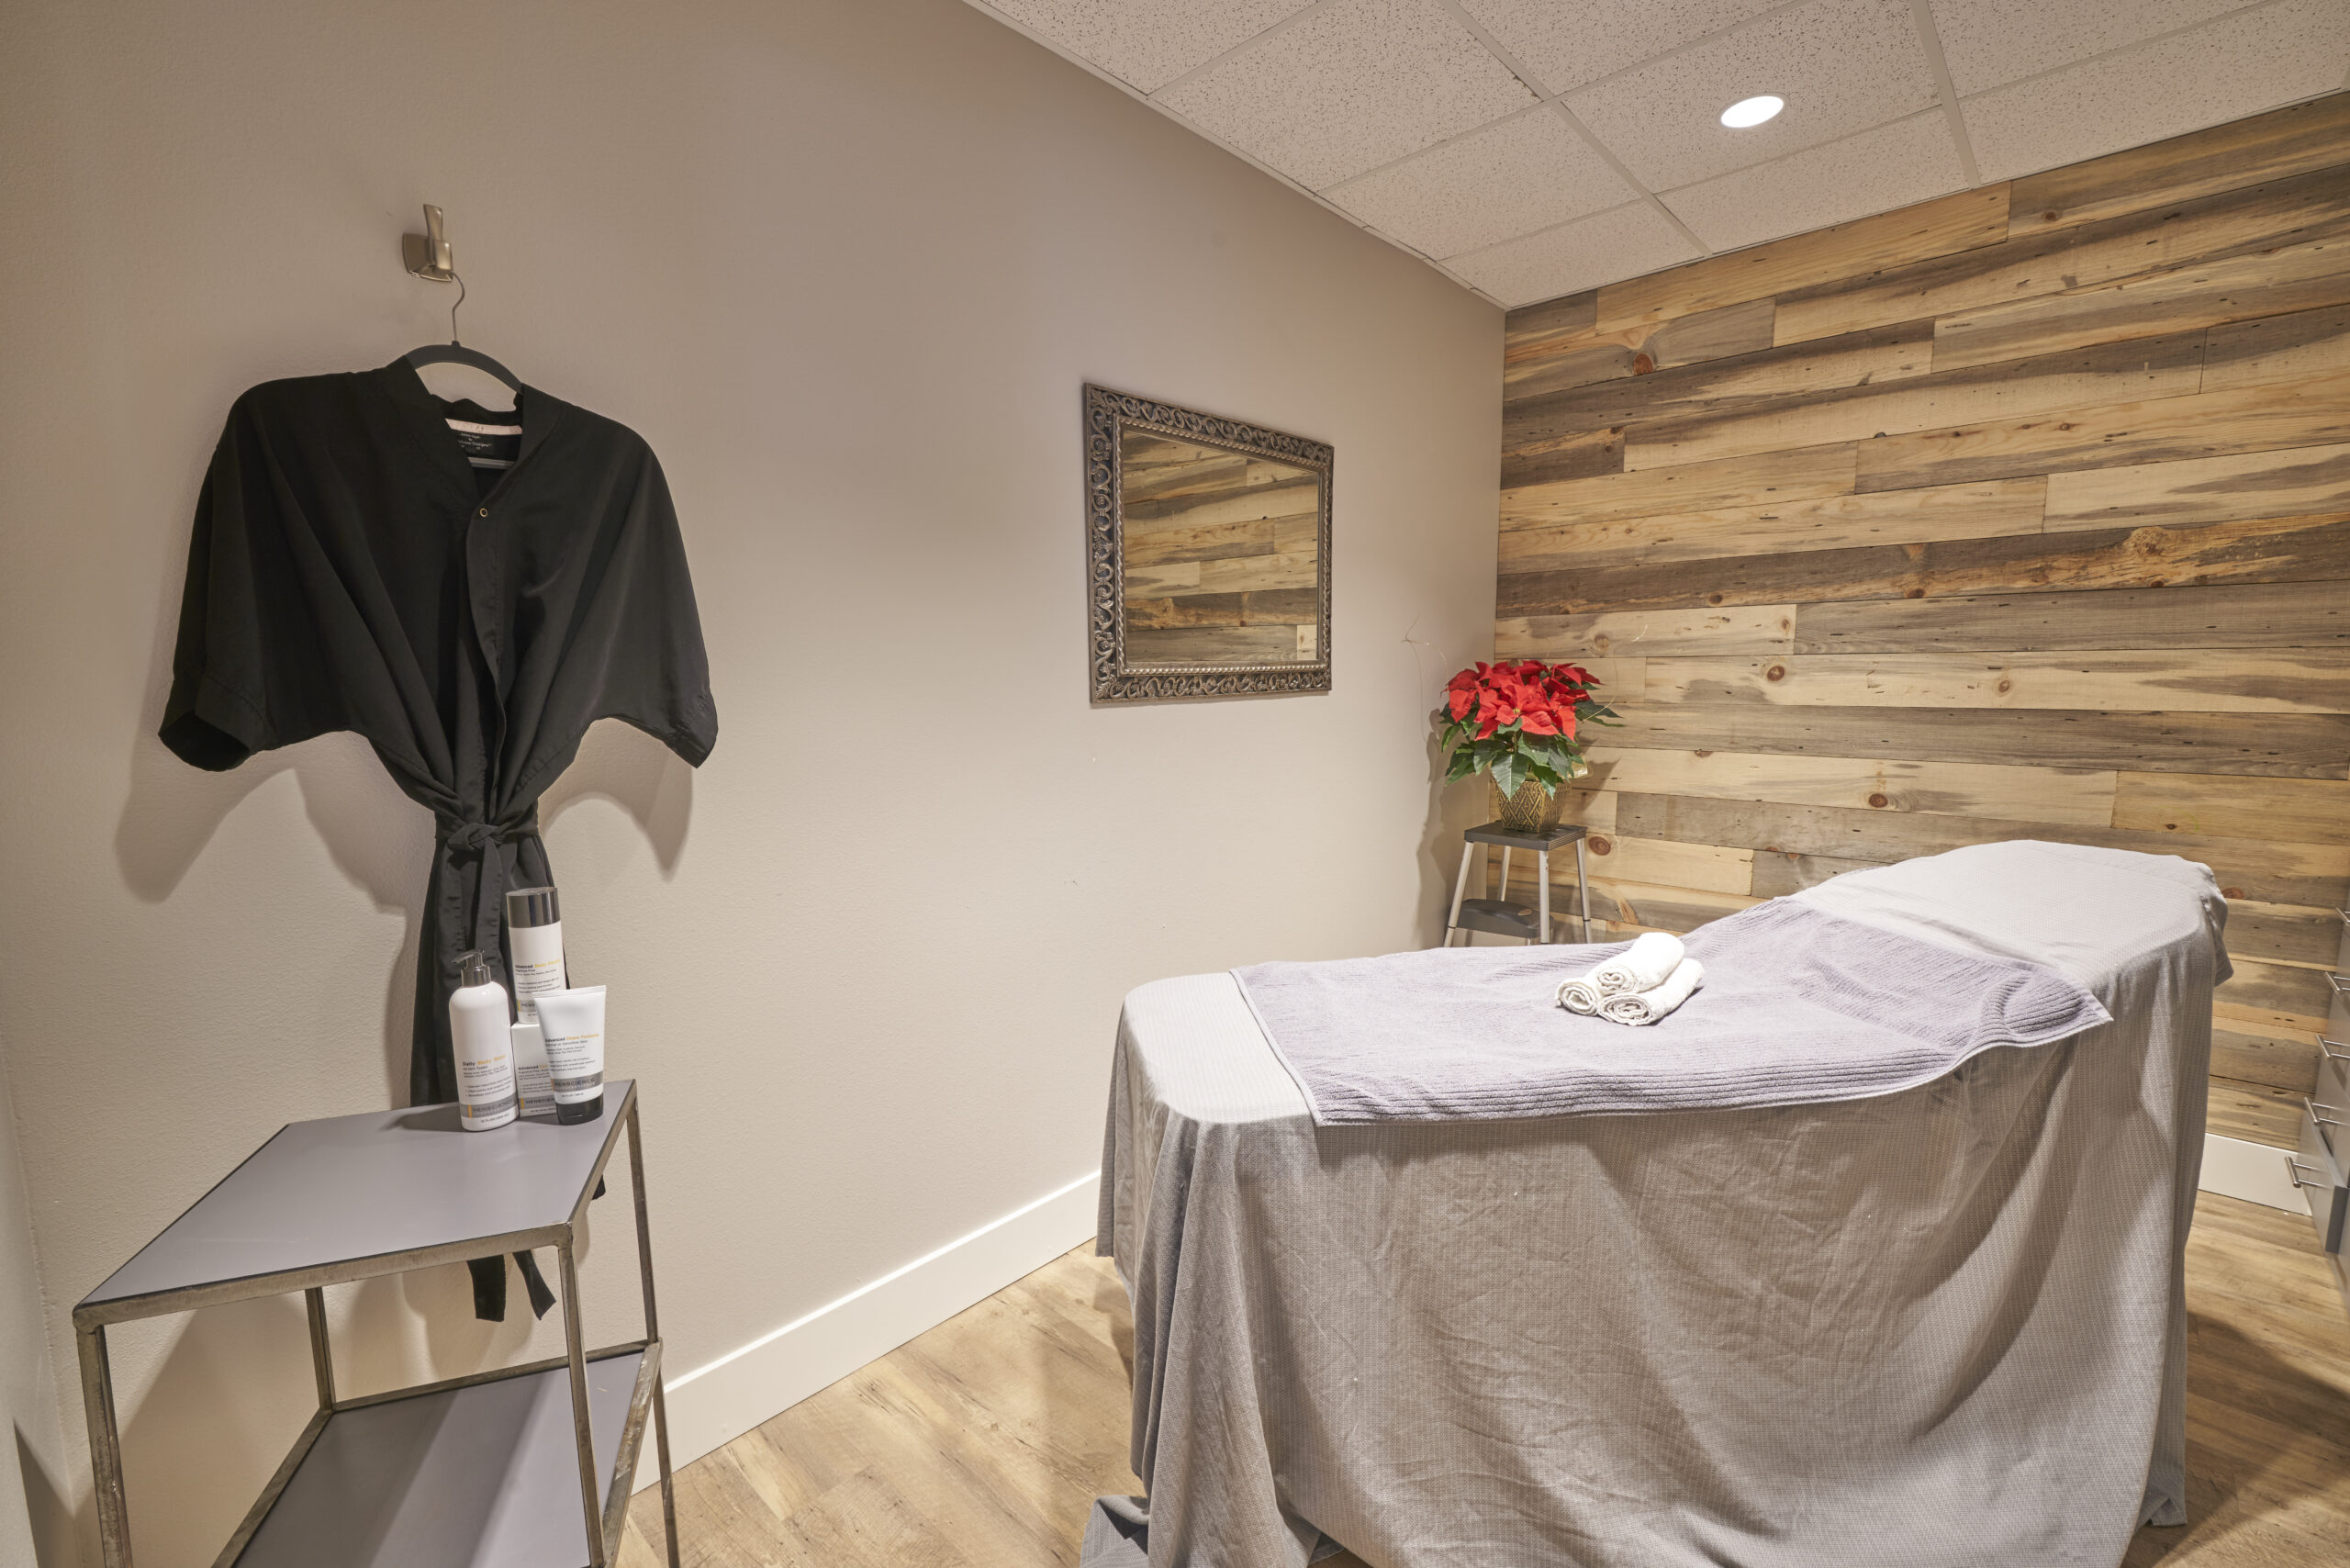 The male waxing salon of Orange County, California. FOR MEN Salon and Spa located in Lake Forest.